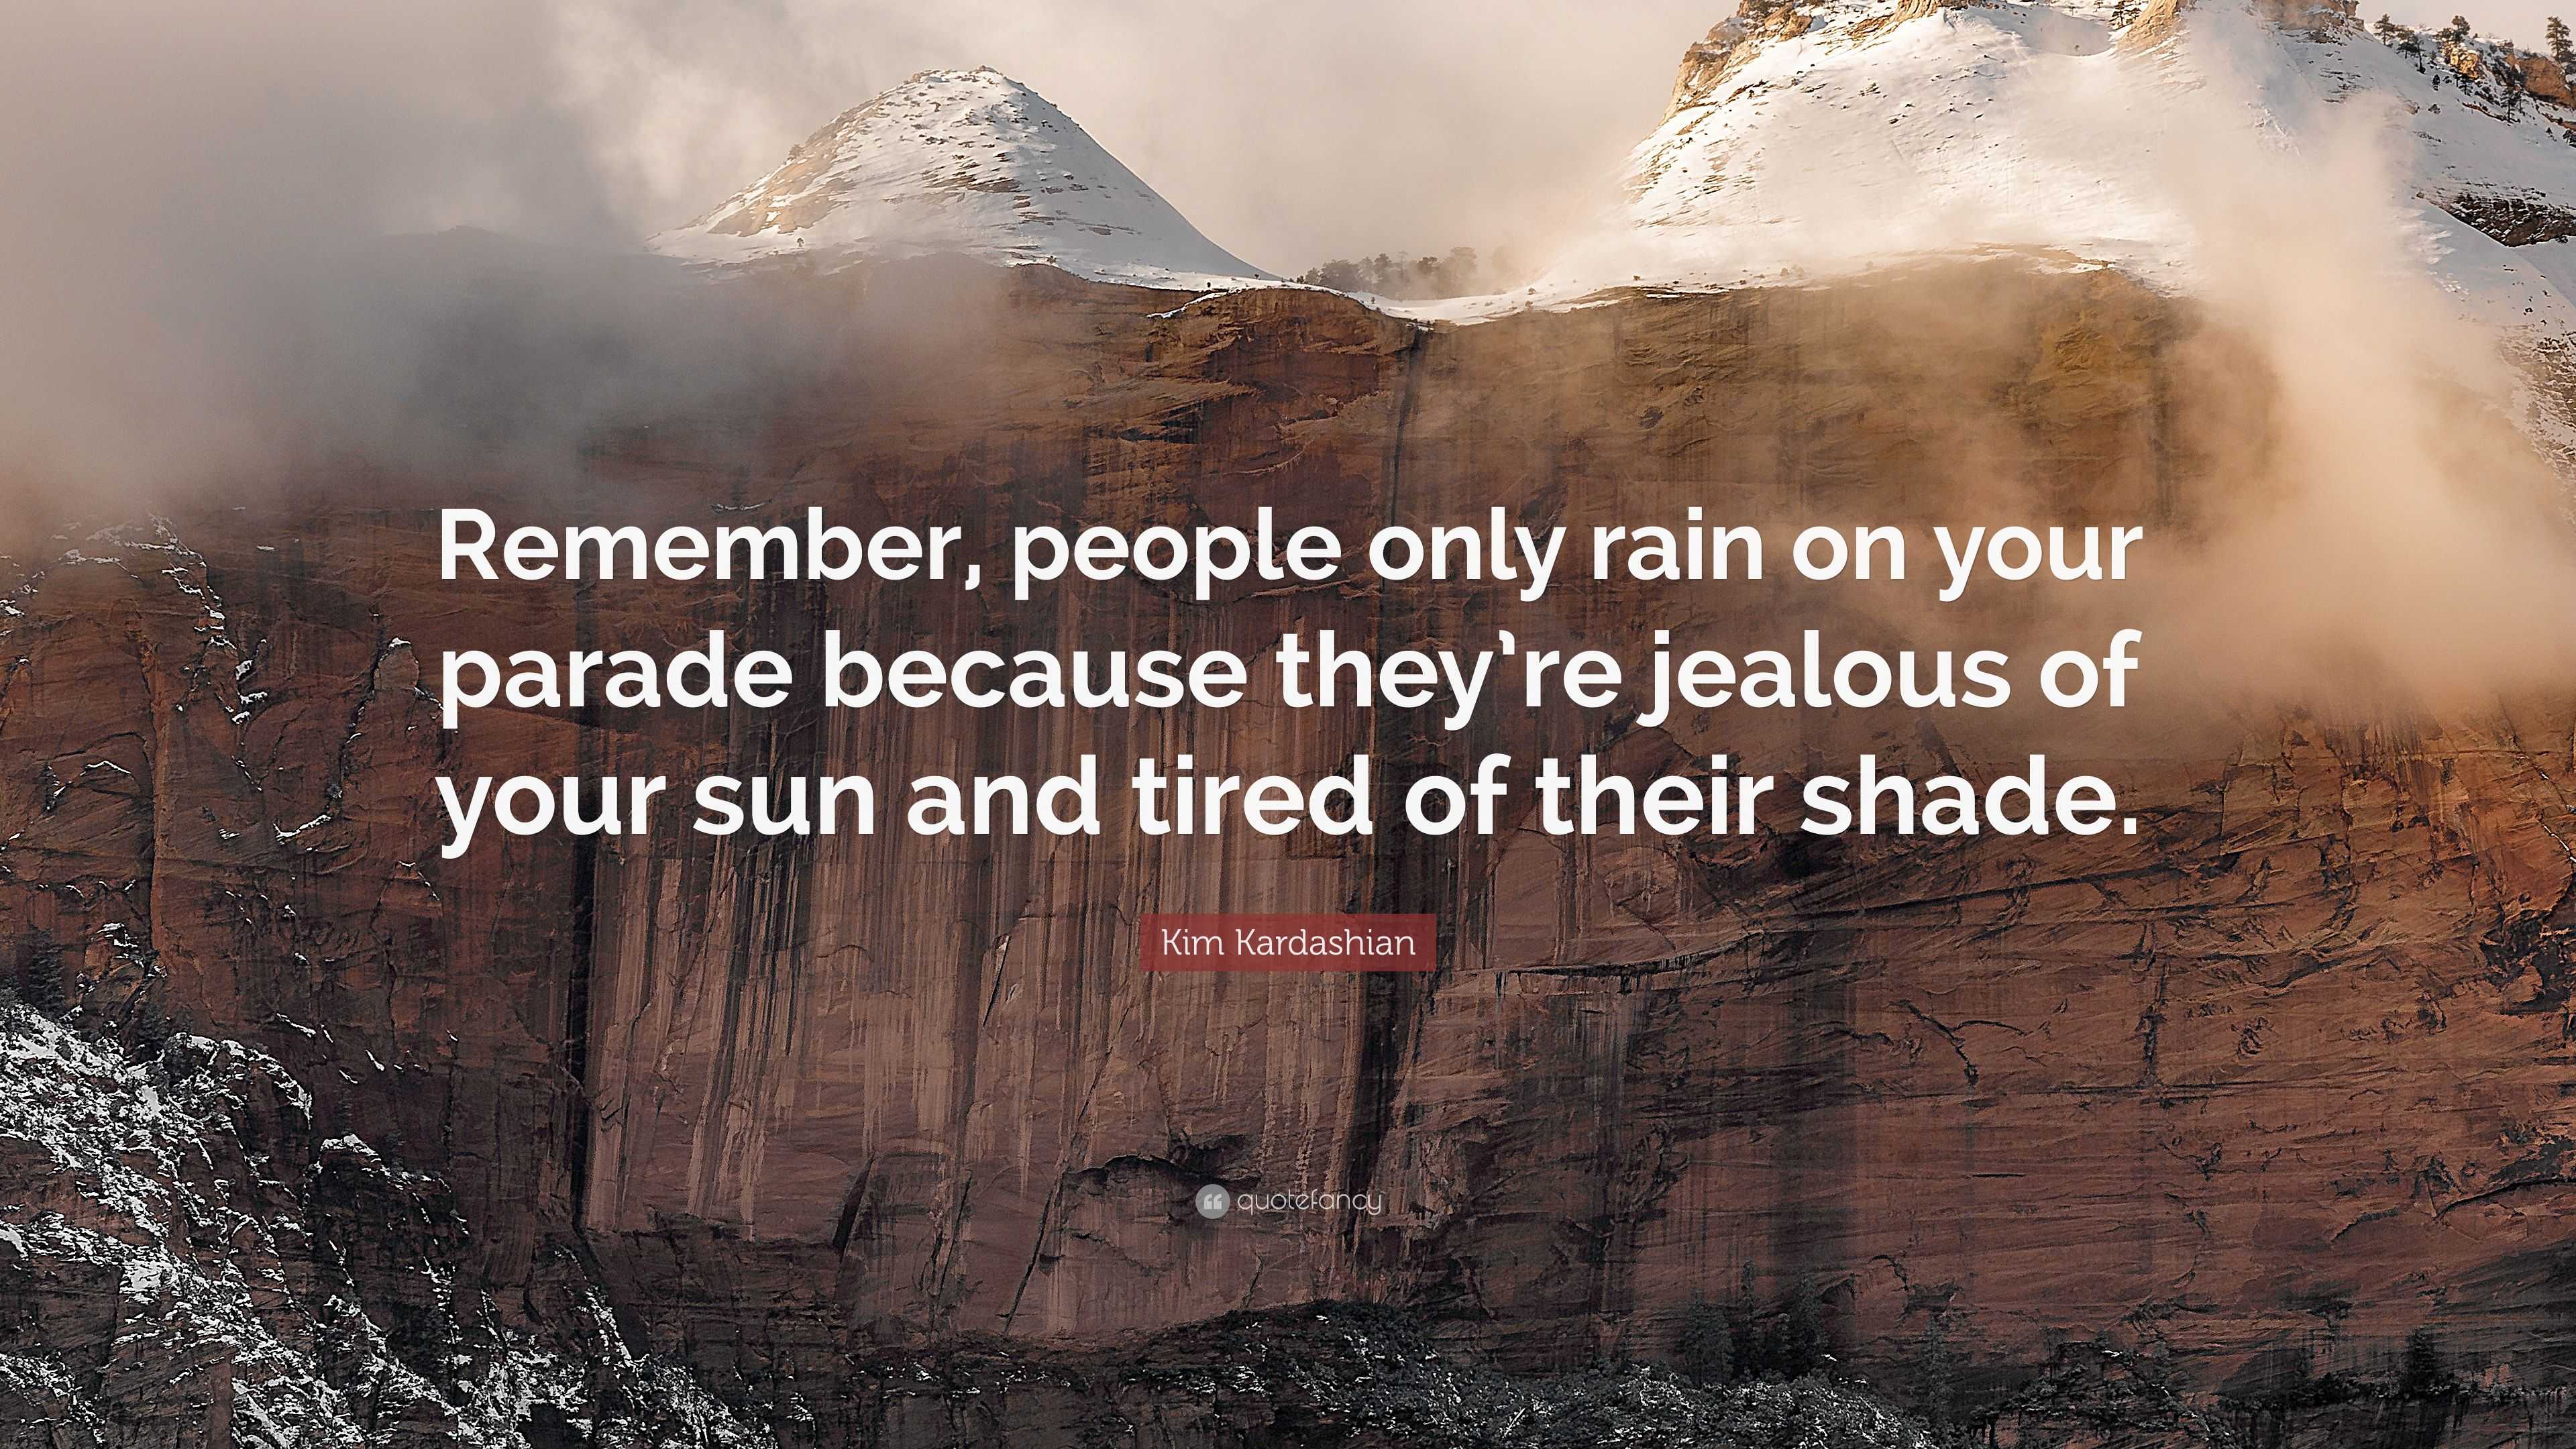 Someone is going to rain on your parade - if you let them